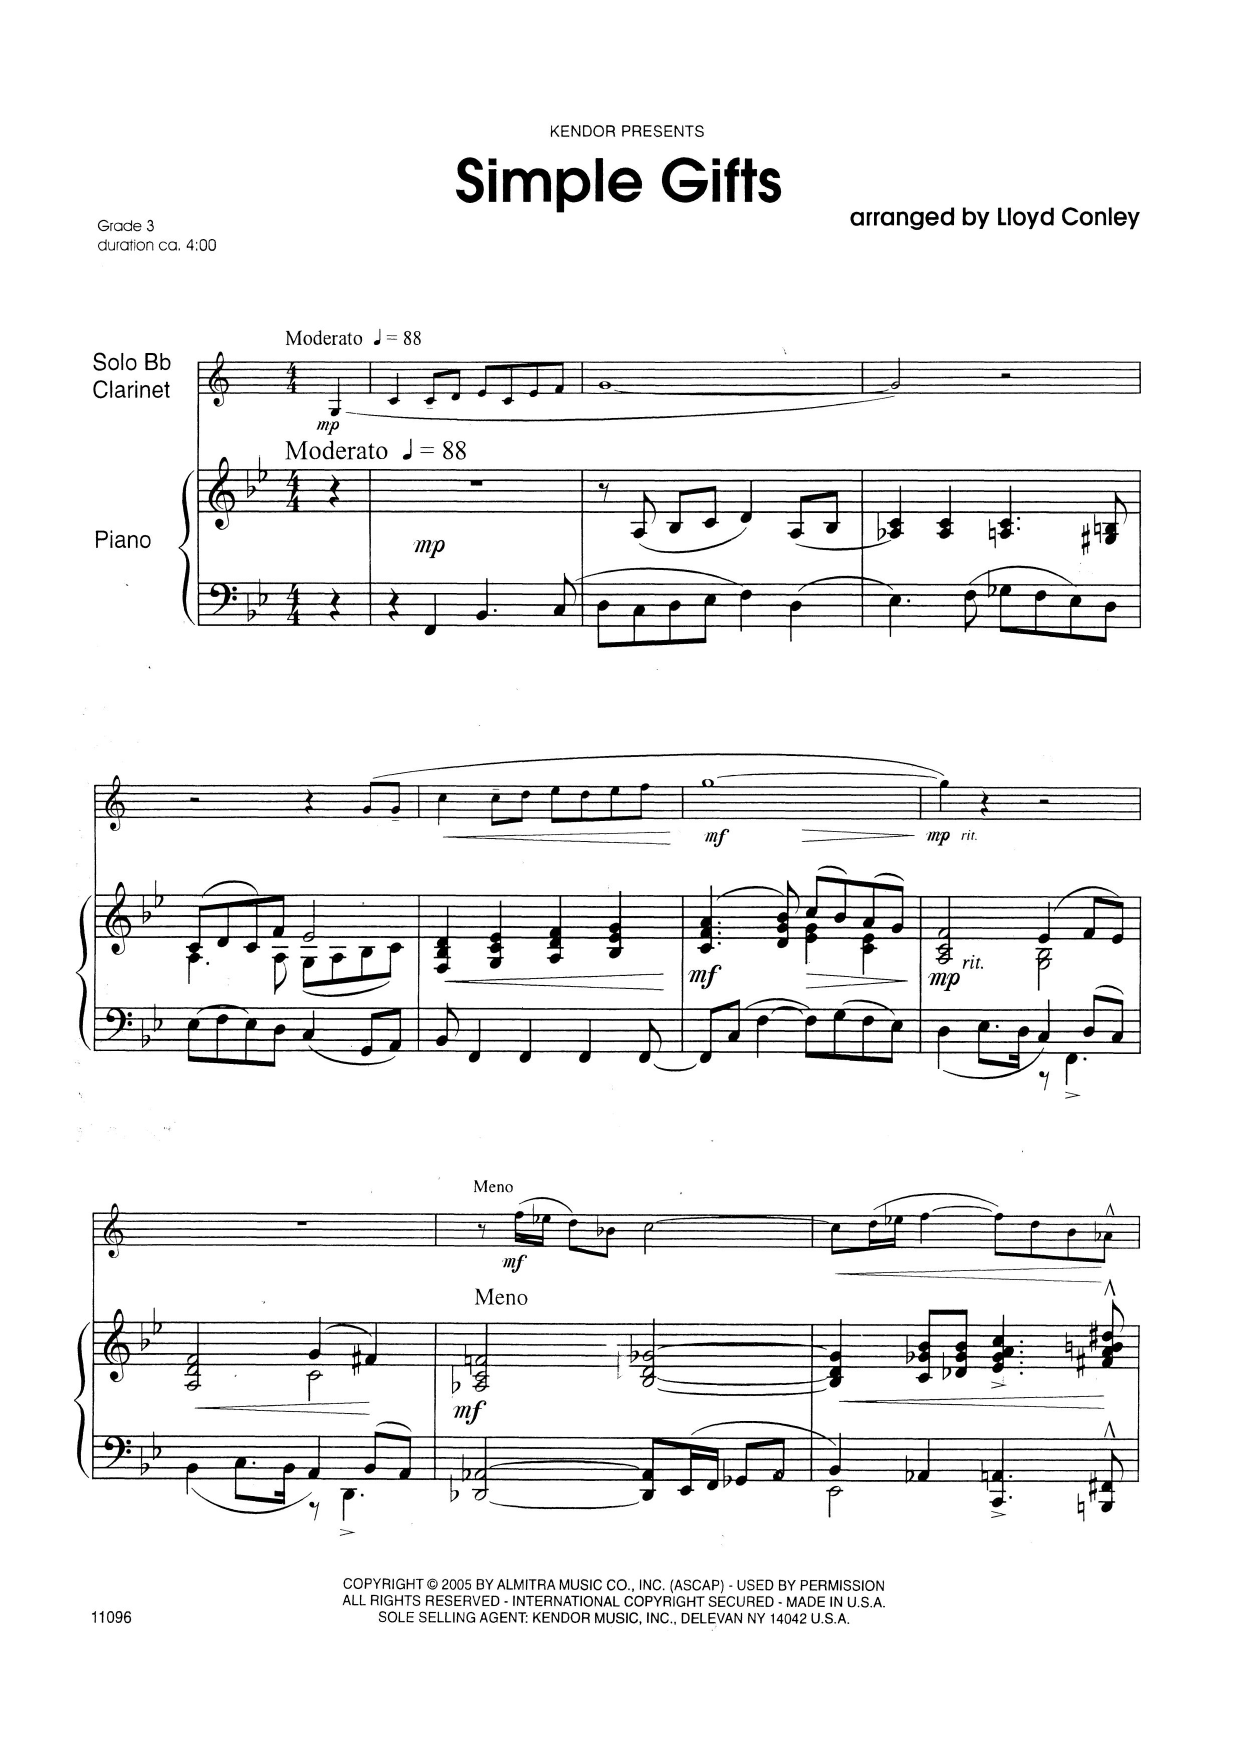 Download Lloyd Conely Simple Gifts - Piano Sheet Music